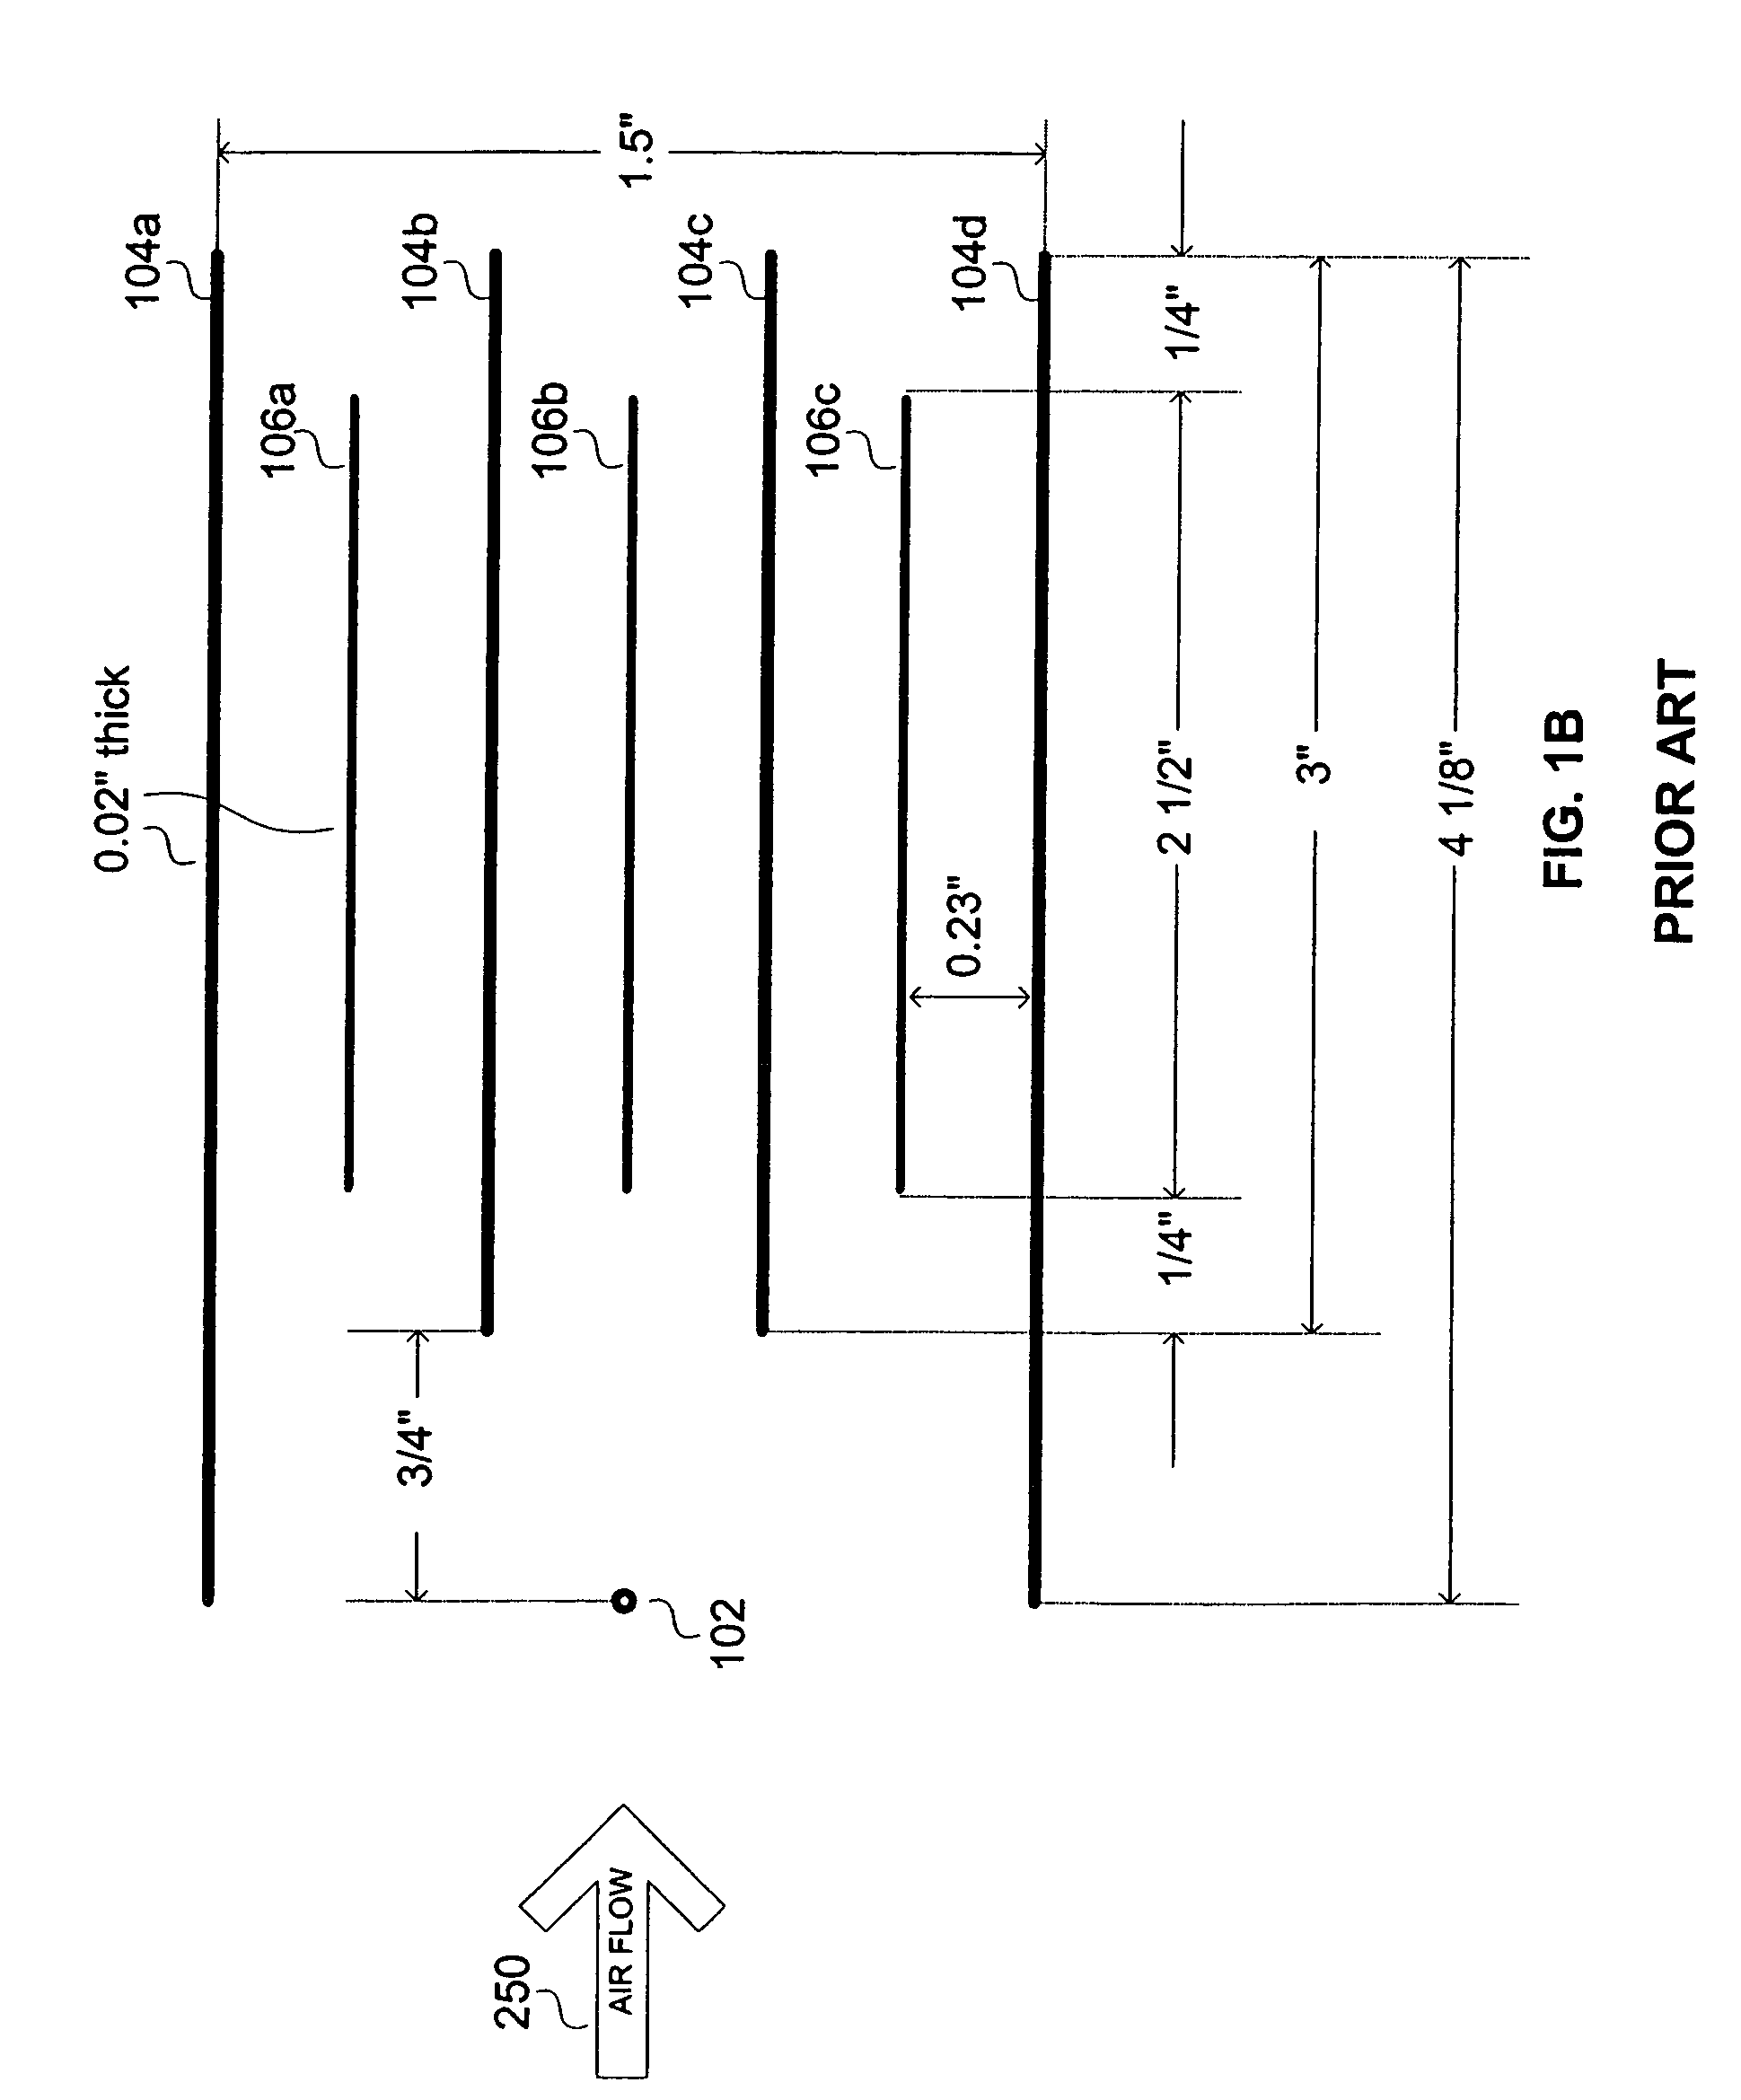 Electrostatic precipitators with insulated driver electrodes